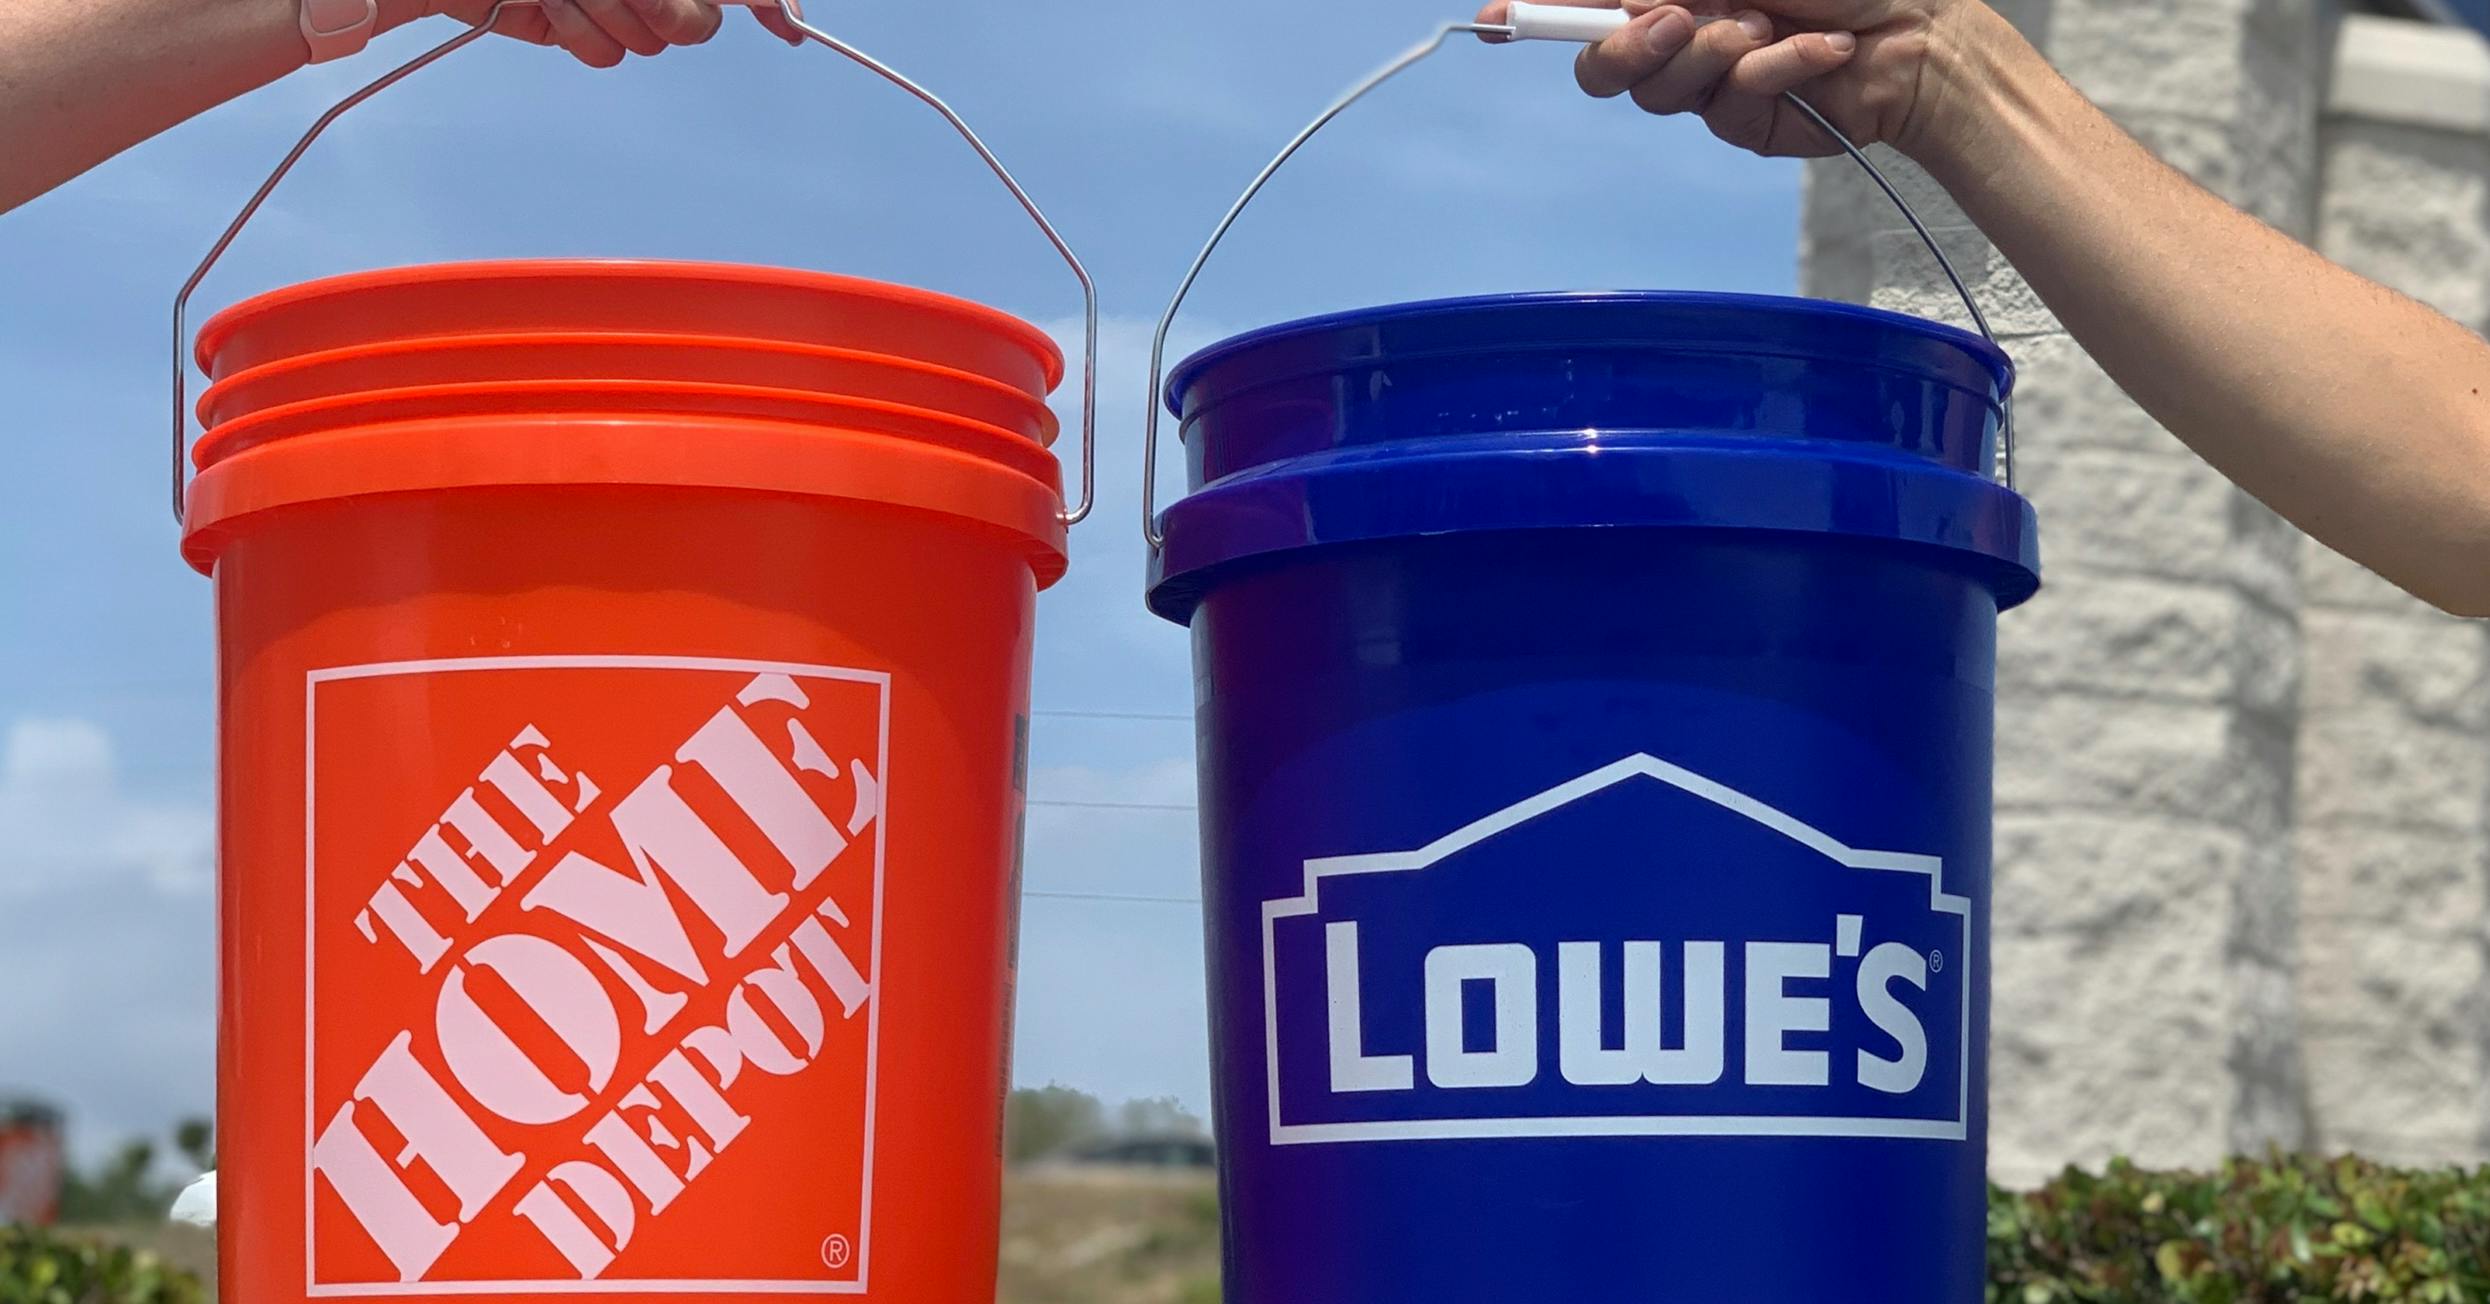 Lowe's vs. Home Depot: Whose Prices Are Cheaper? - The Krazy Coupon Lady